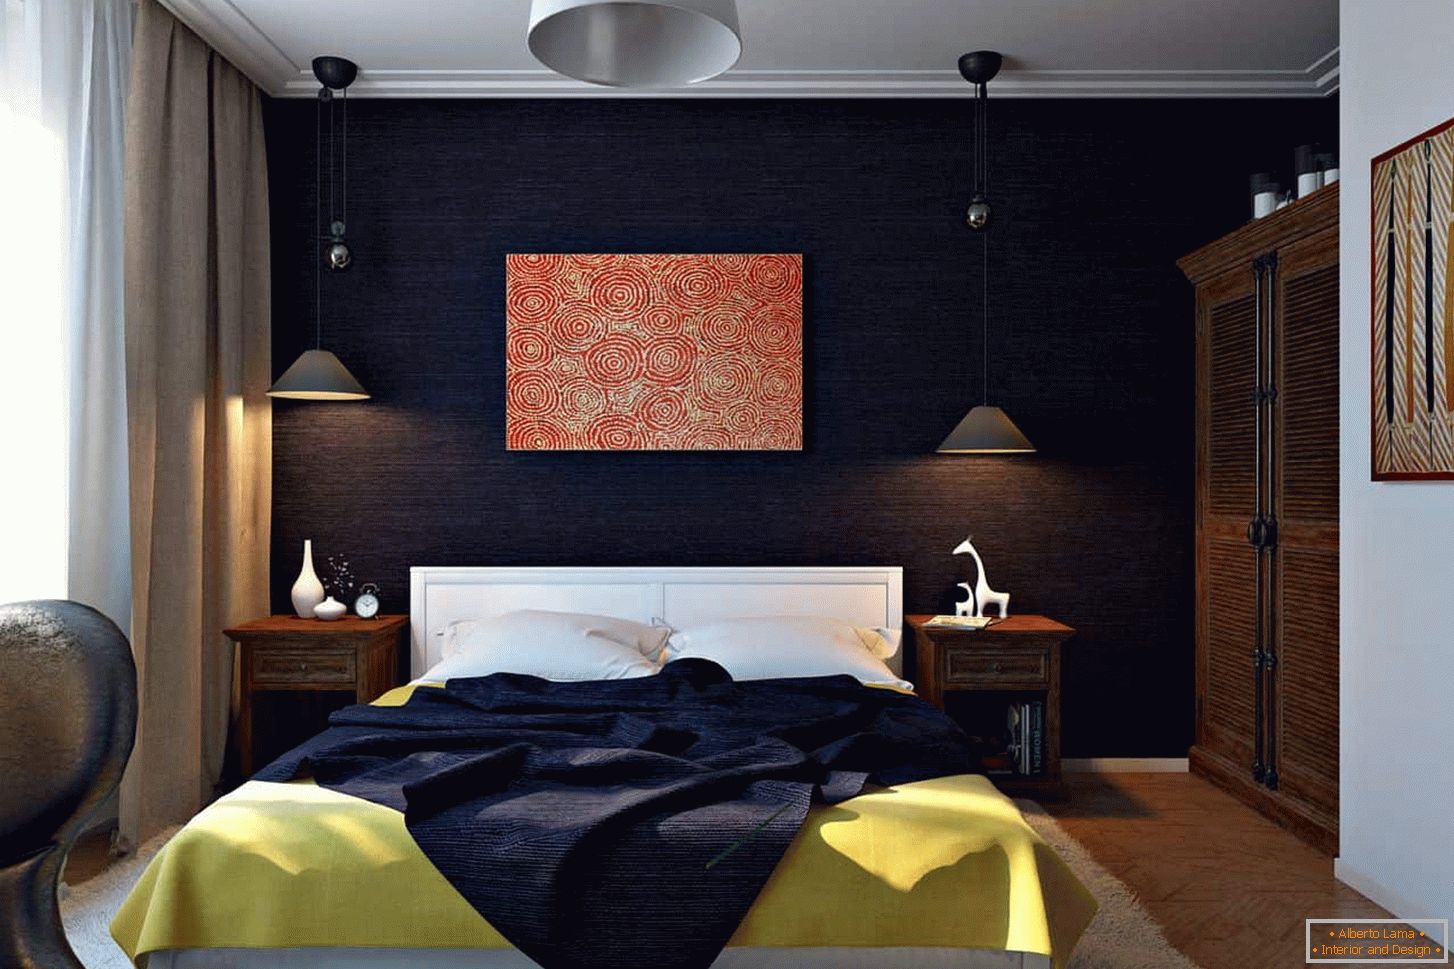 Eggplant color in the decoration of the bedroom walls